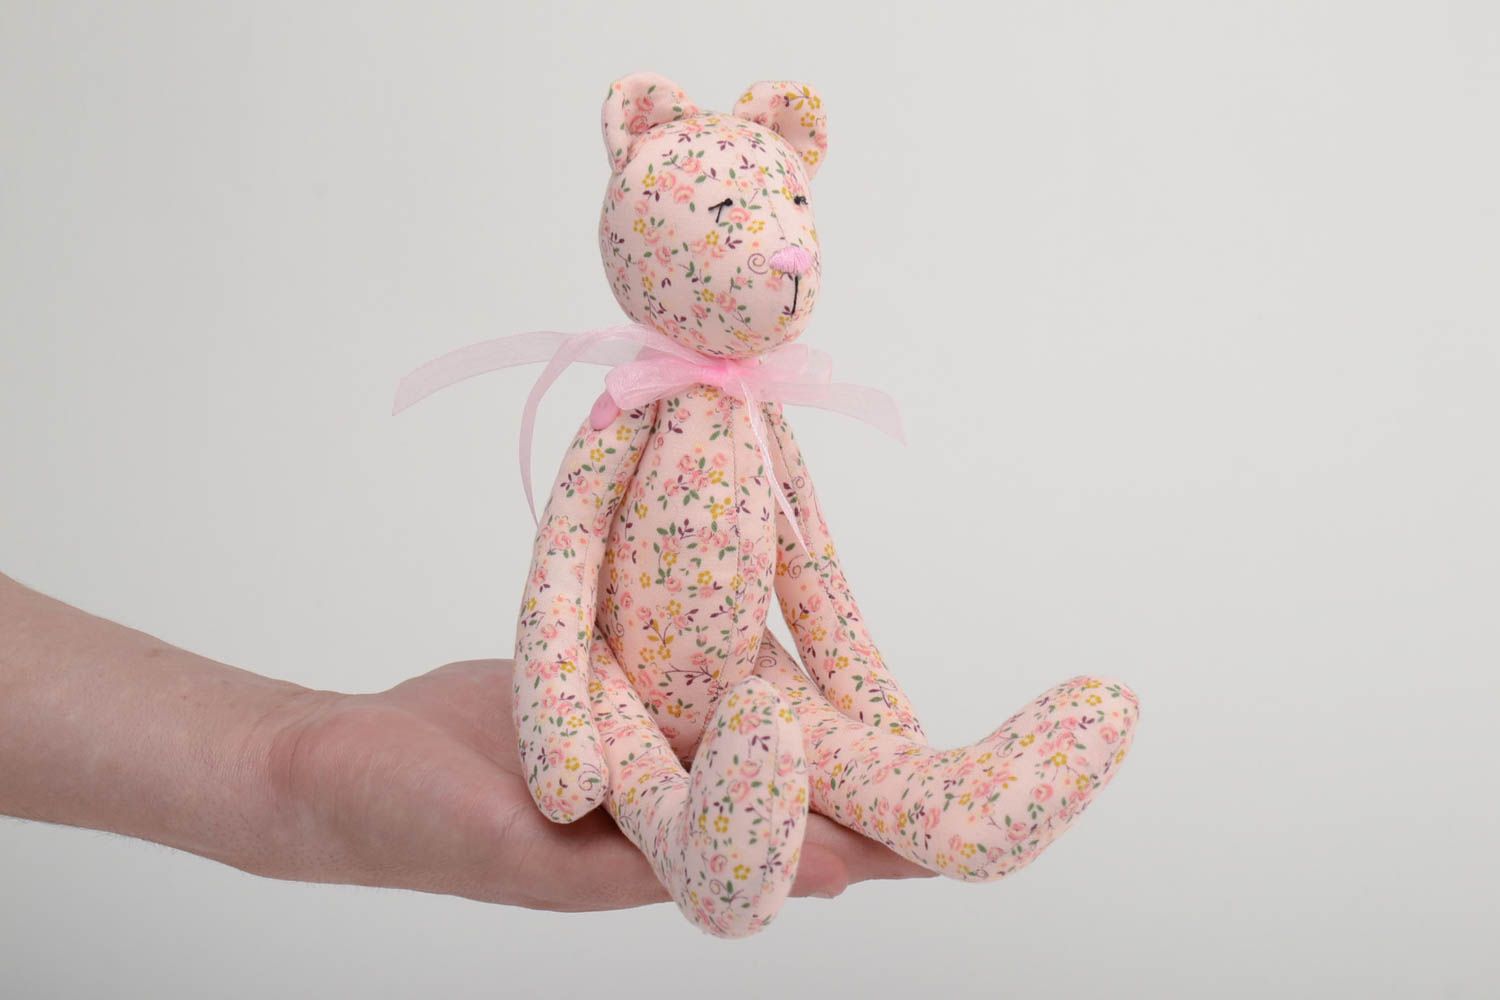 Handmade designer soft toy sewn of tender pink floral cotton fabric bear photo 5